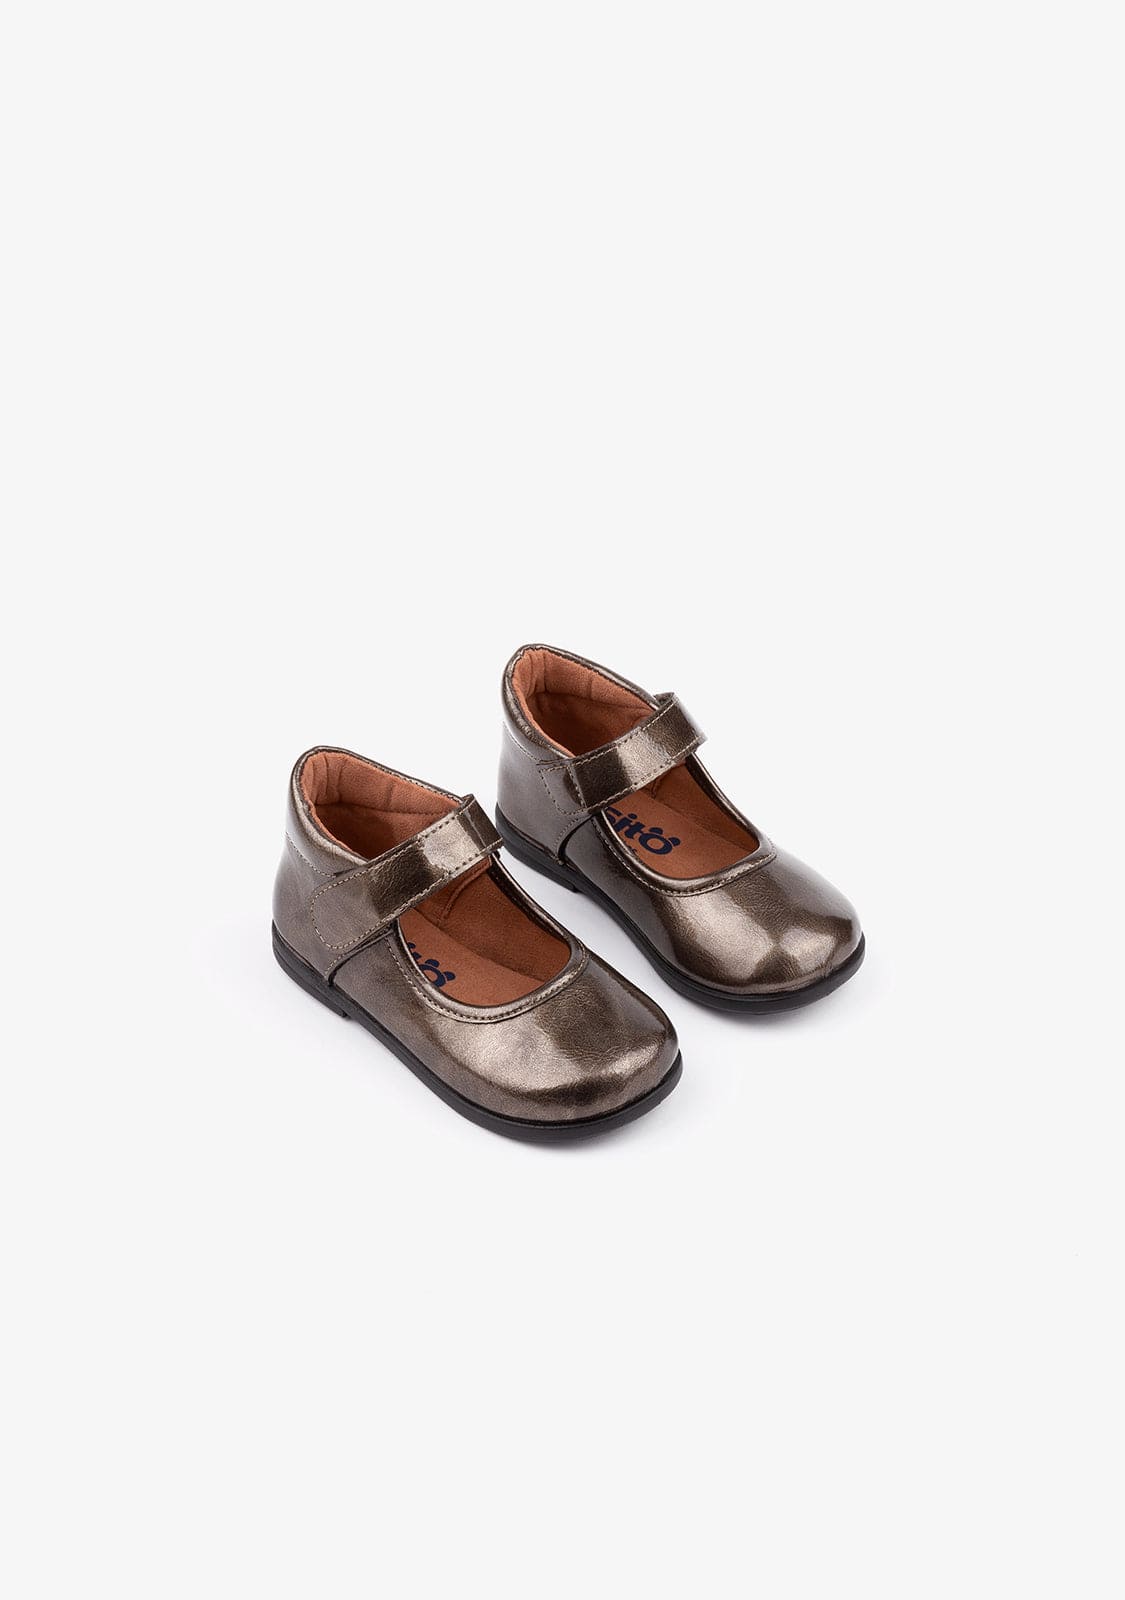 OSITO Shoes Baby's Titanium Mary Janes Patent Leather